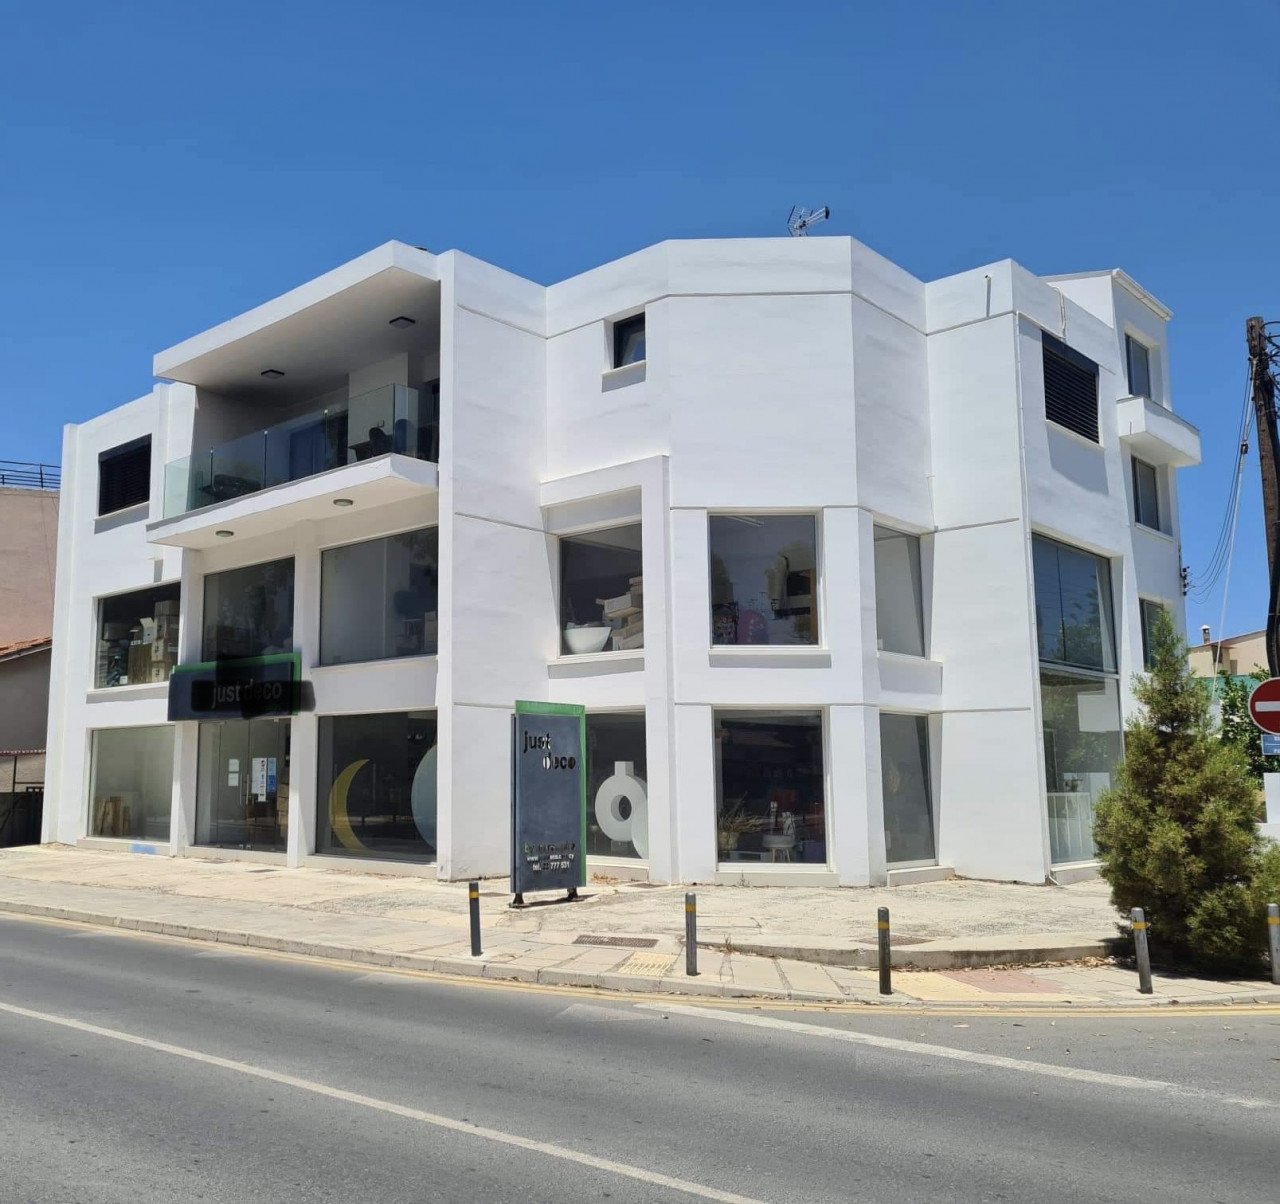 Property for Rent: Commercial (Shop) in Agios Dometios, Nicosia for Rent | Key Realtor Cyprus